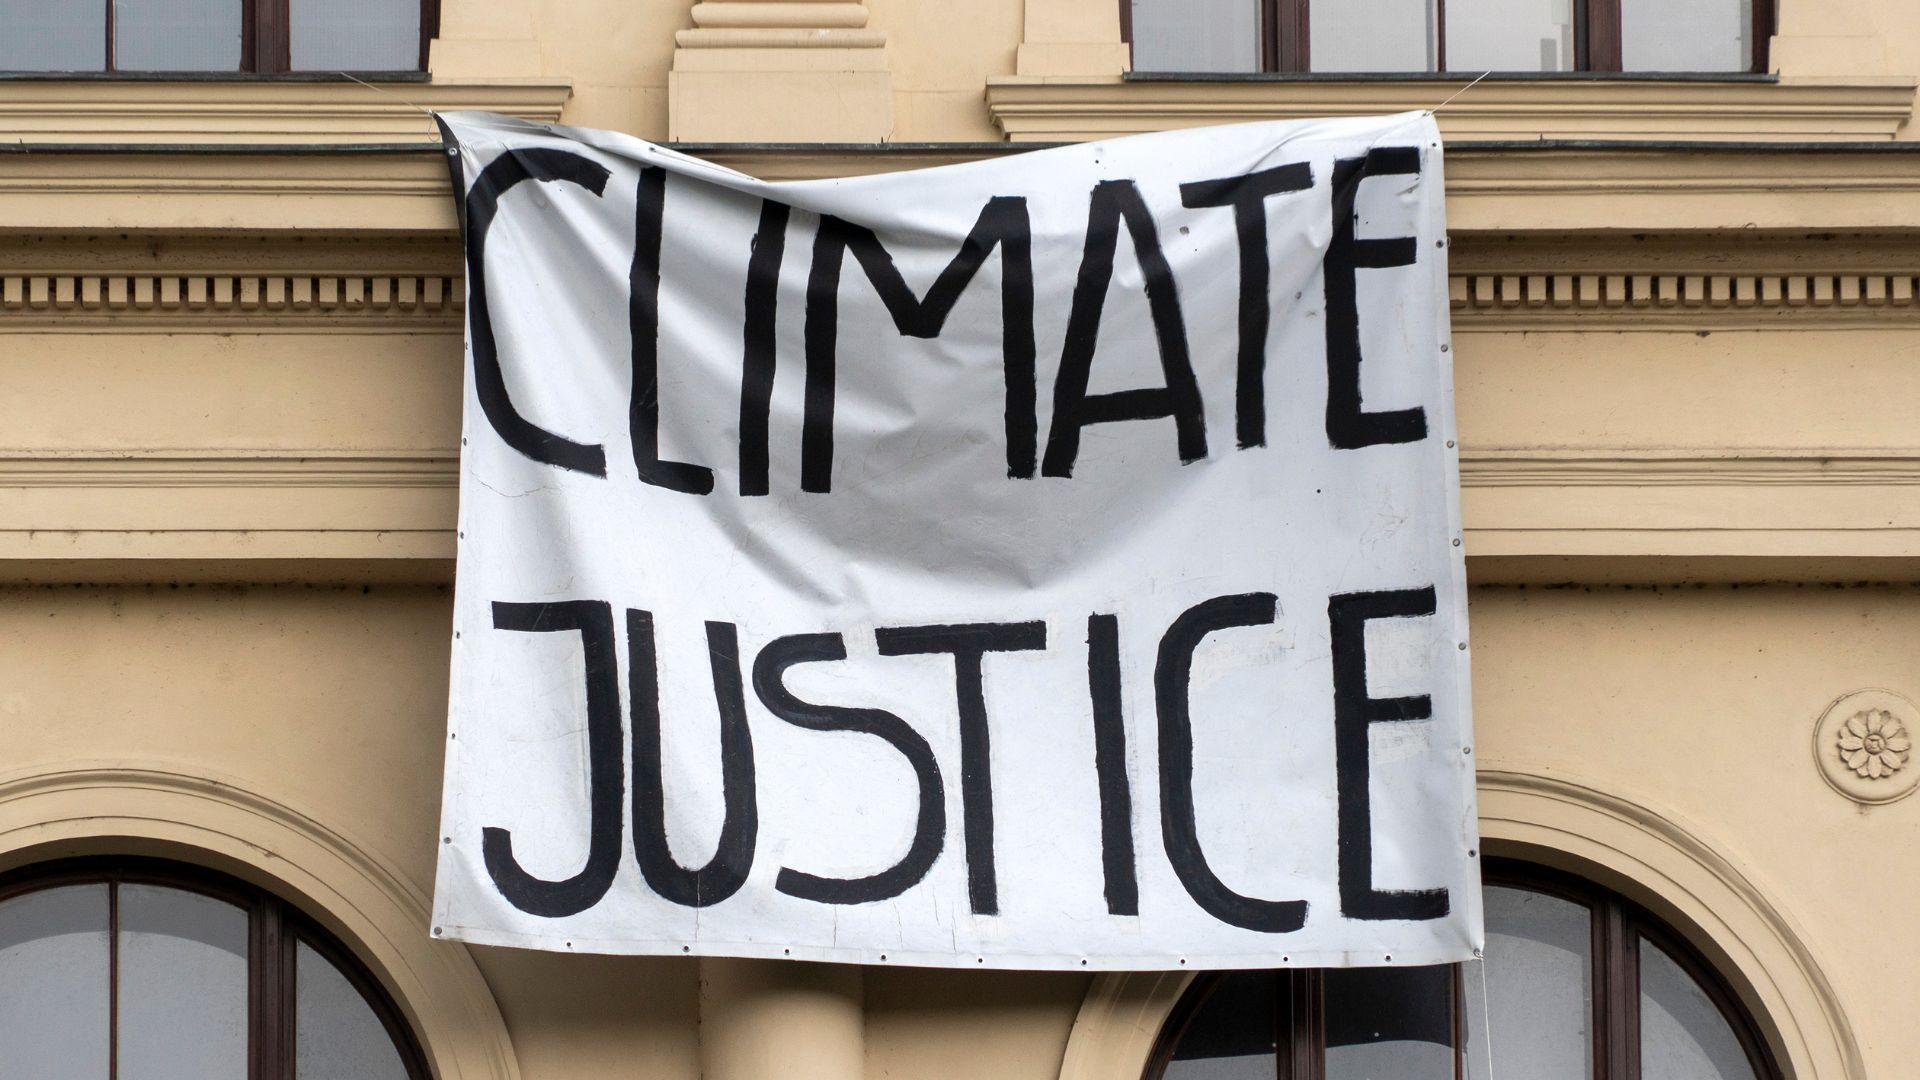 A banner hanging on the side of a building reads "Climate Justice."